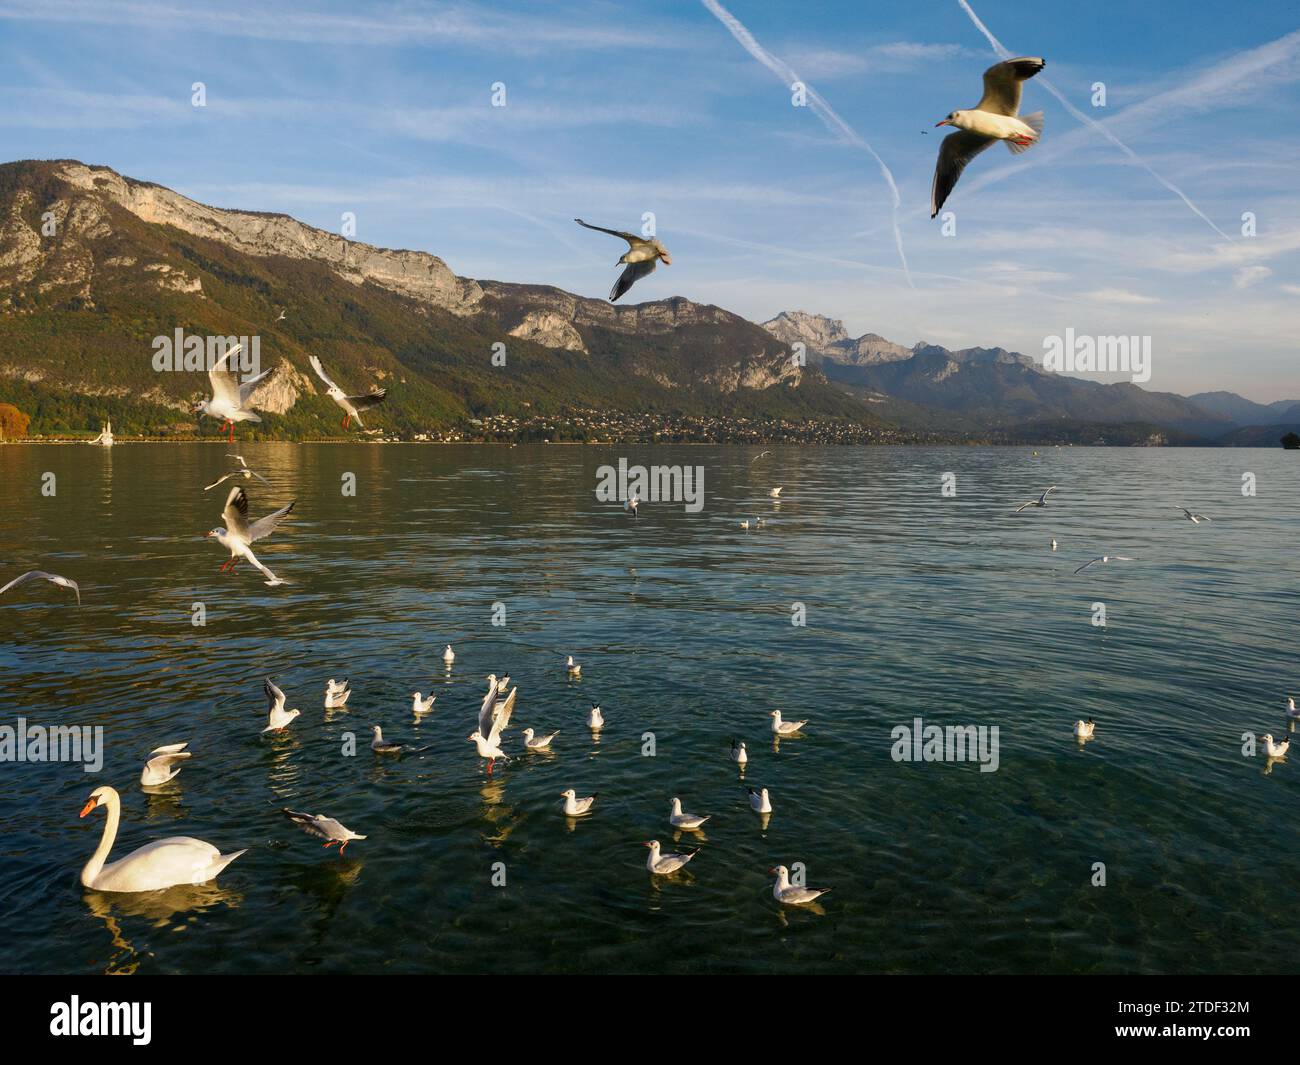 Swans and seagulls flock to Annecy's lakeside promenade, Annecy, Haute-Savoie, France, Europe Stock Photo